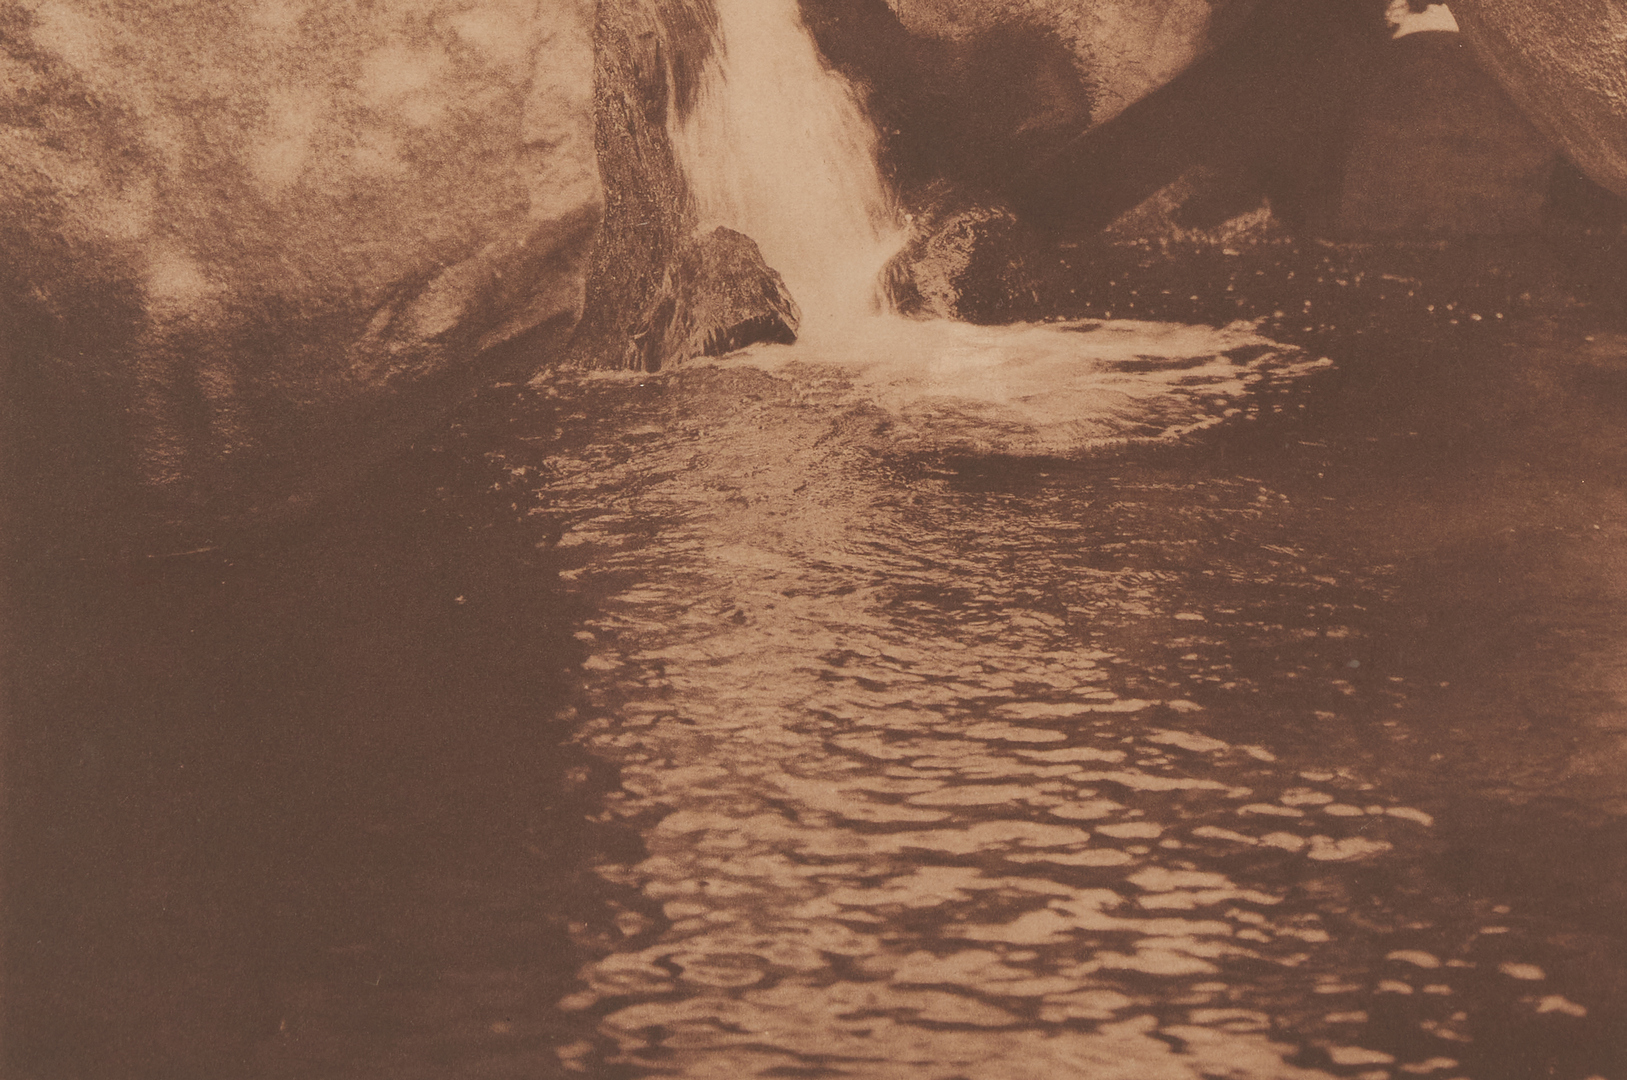 Lot 597: After Edward S. Curtis Photogravure, The Fishing Pool – Southern Miwok